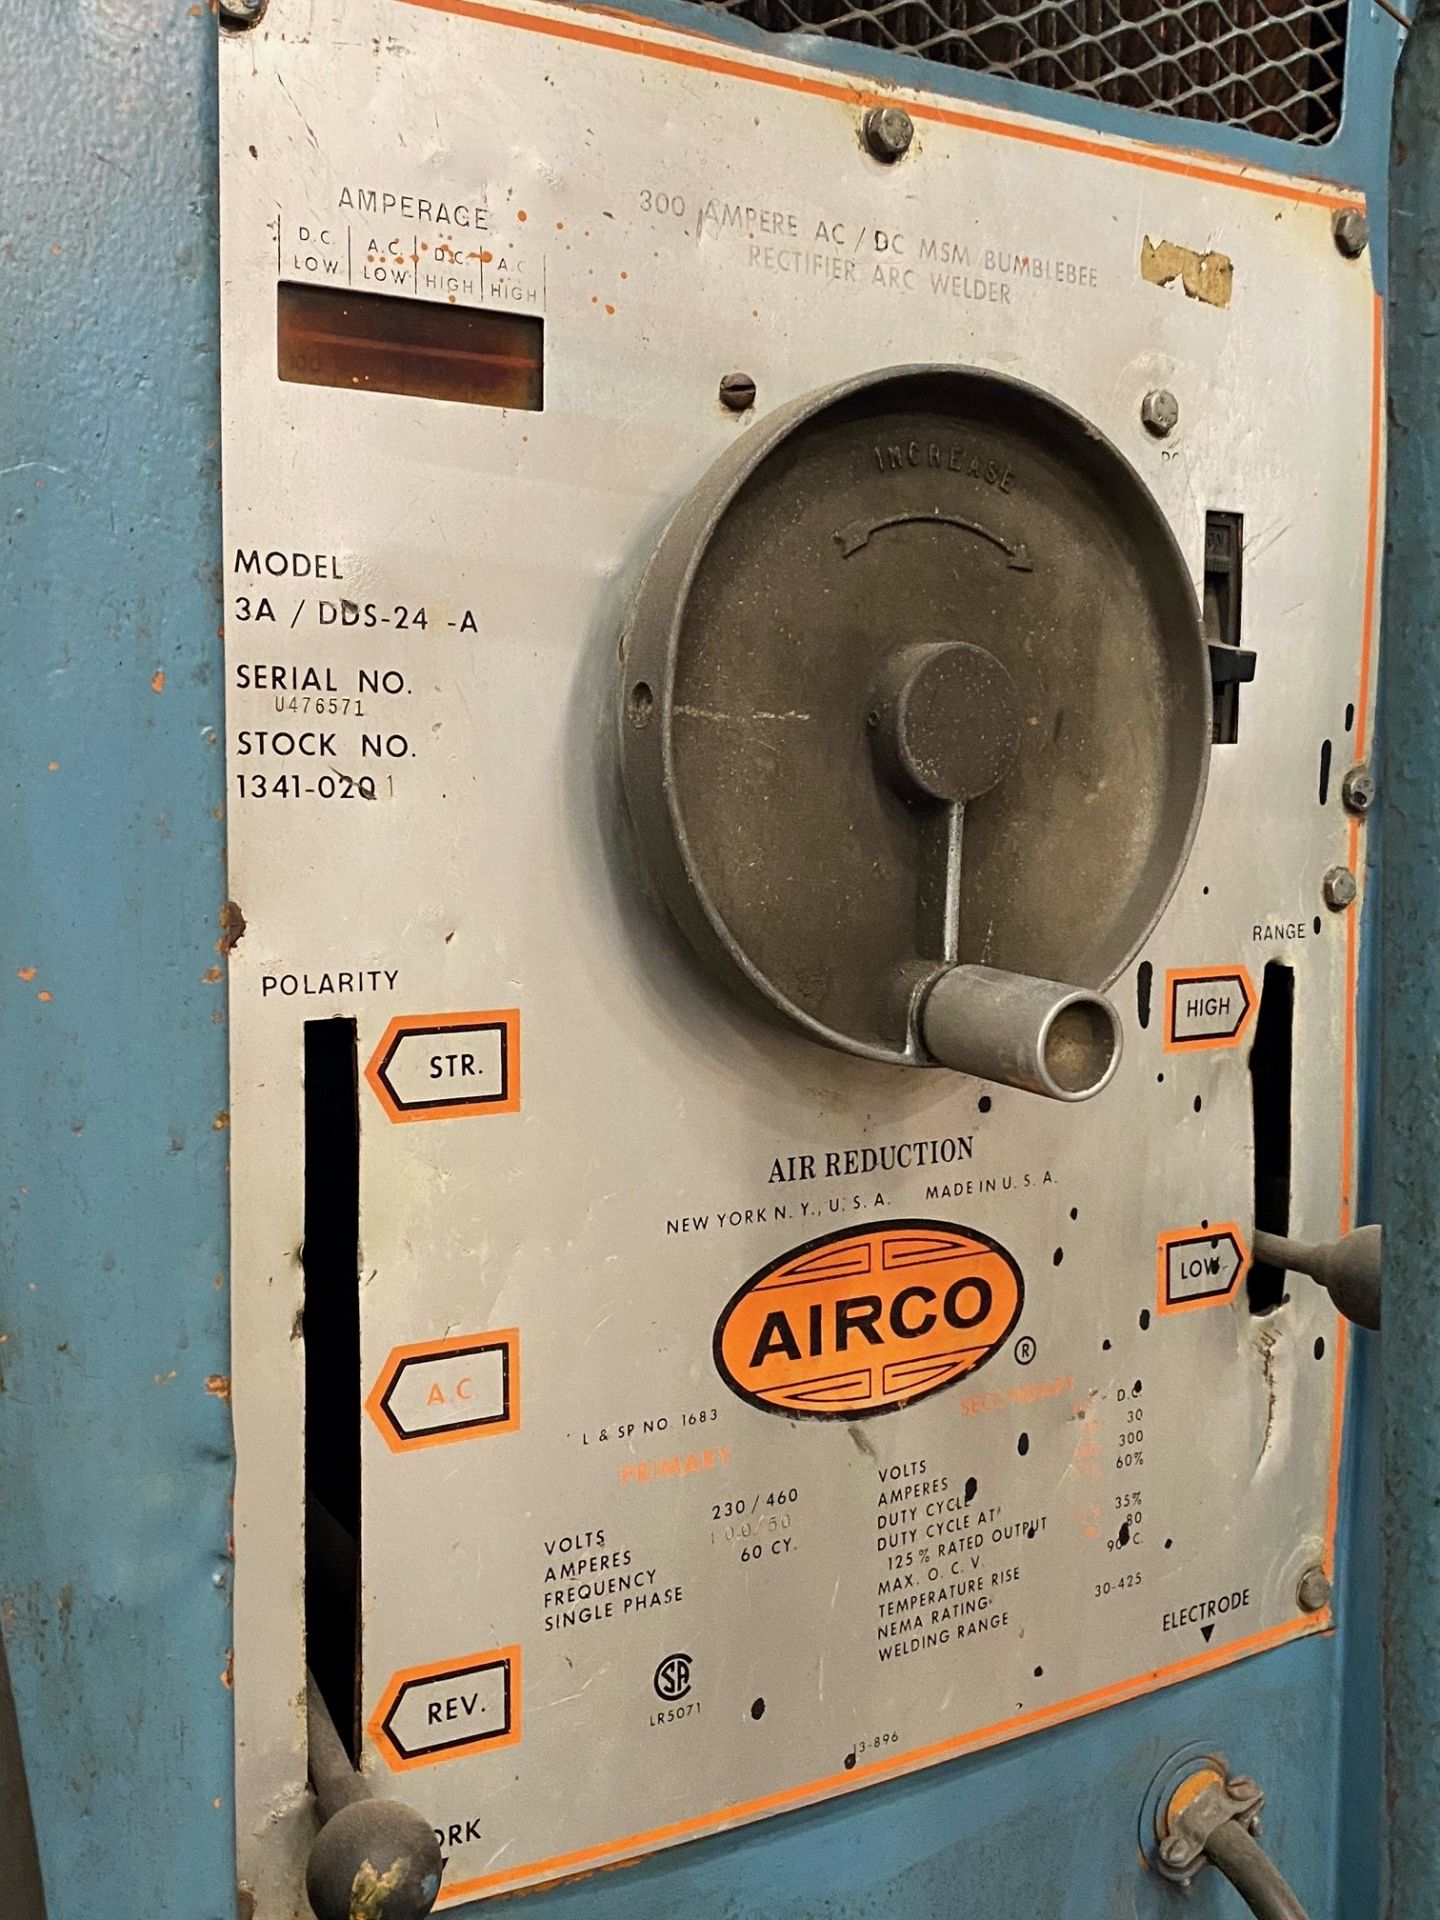 WELDING MACHINE, AIRCO, MDL. 3A/DDS-24-A, S/N U476571 (LOCATED AT: AF GLOBAL/MASS FLANGE FACILITY, - Image 5 of 5